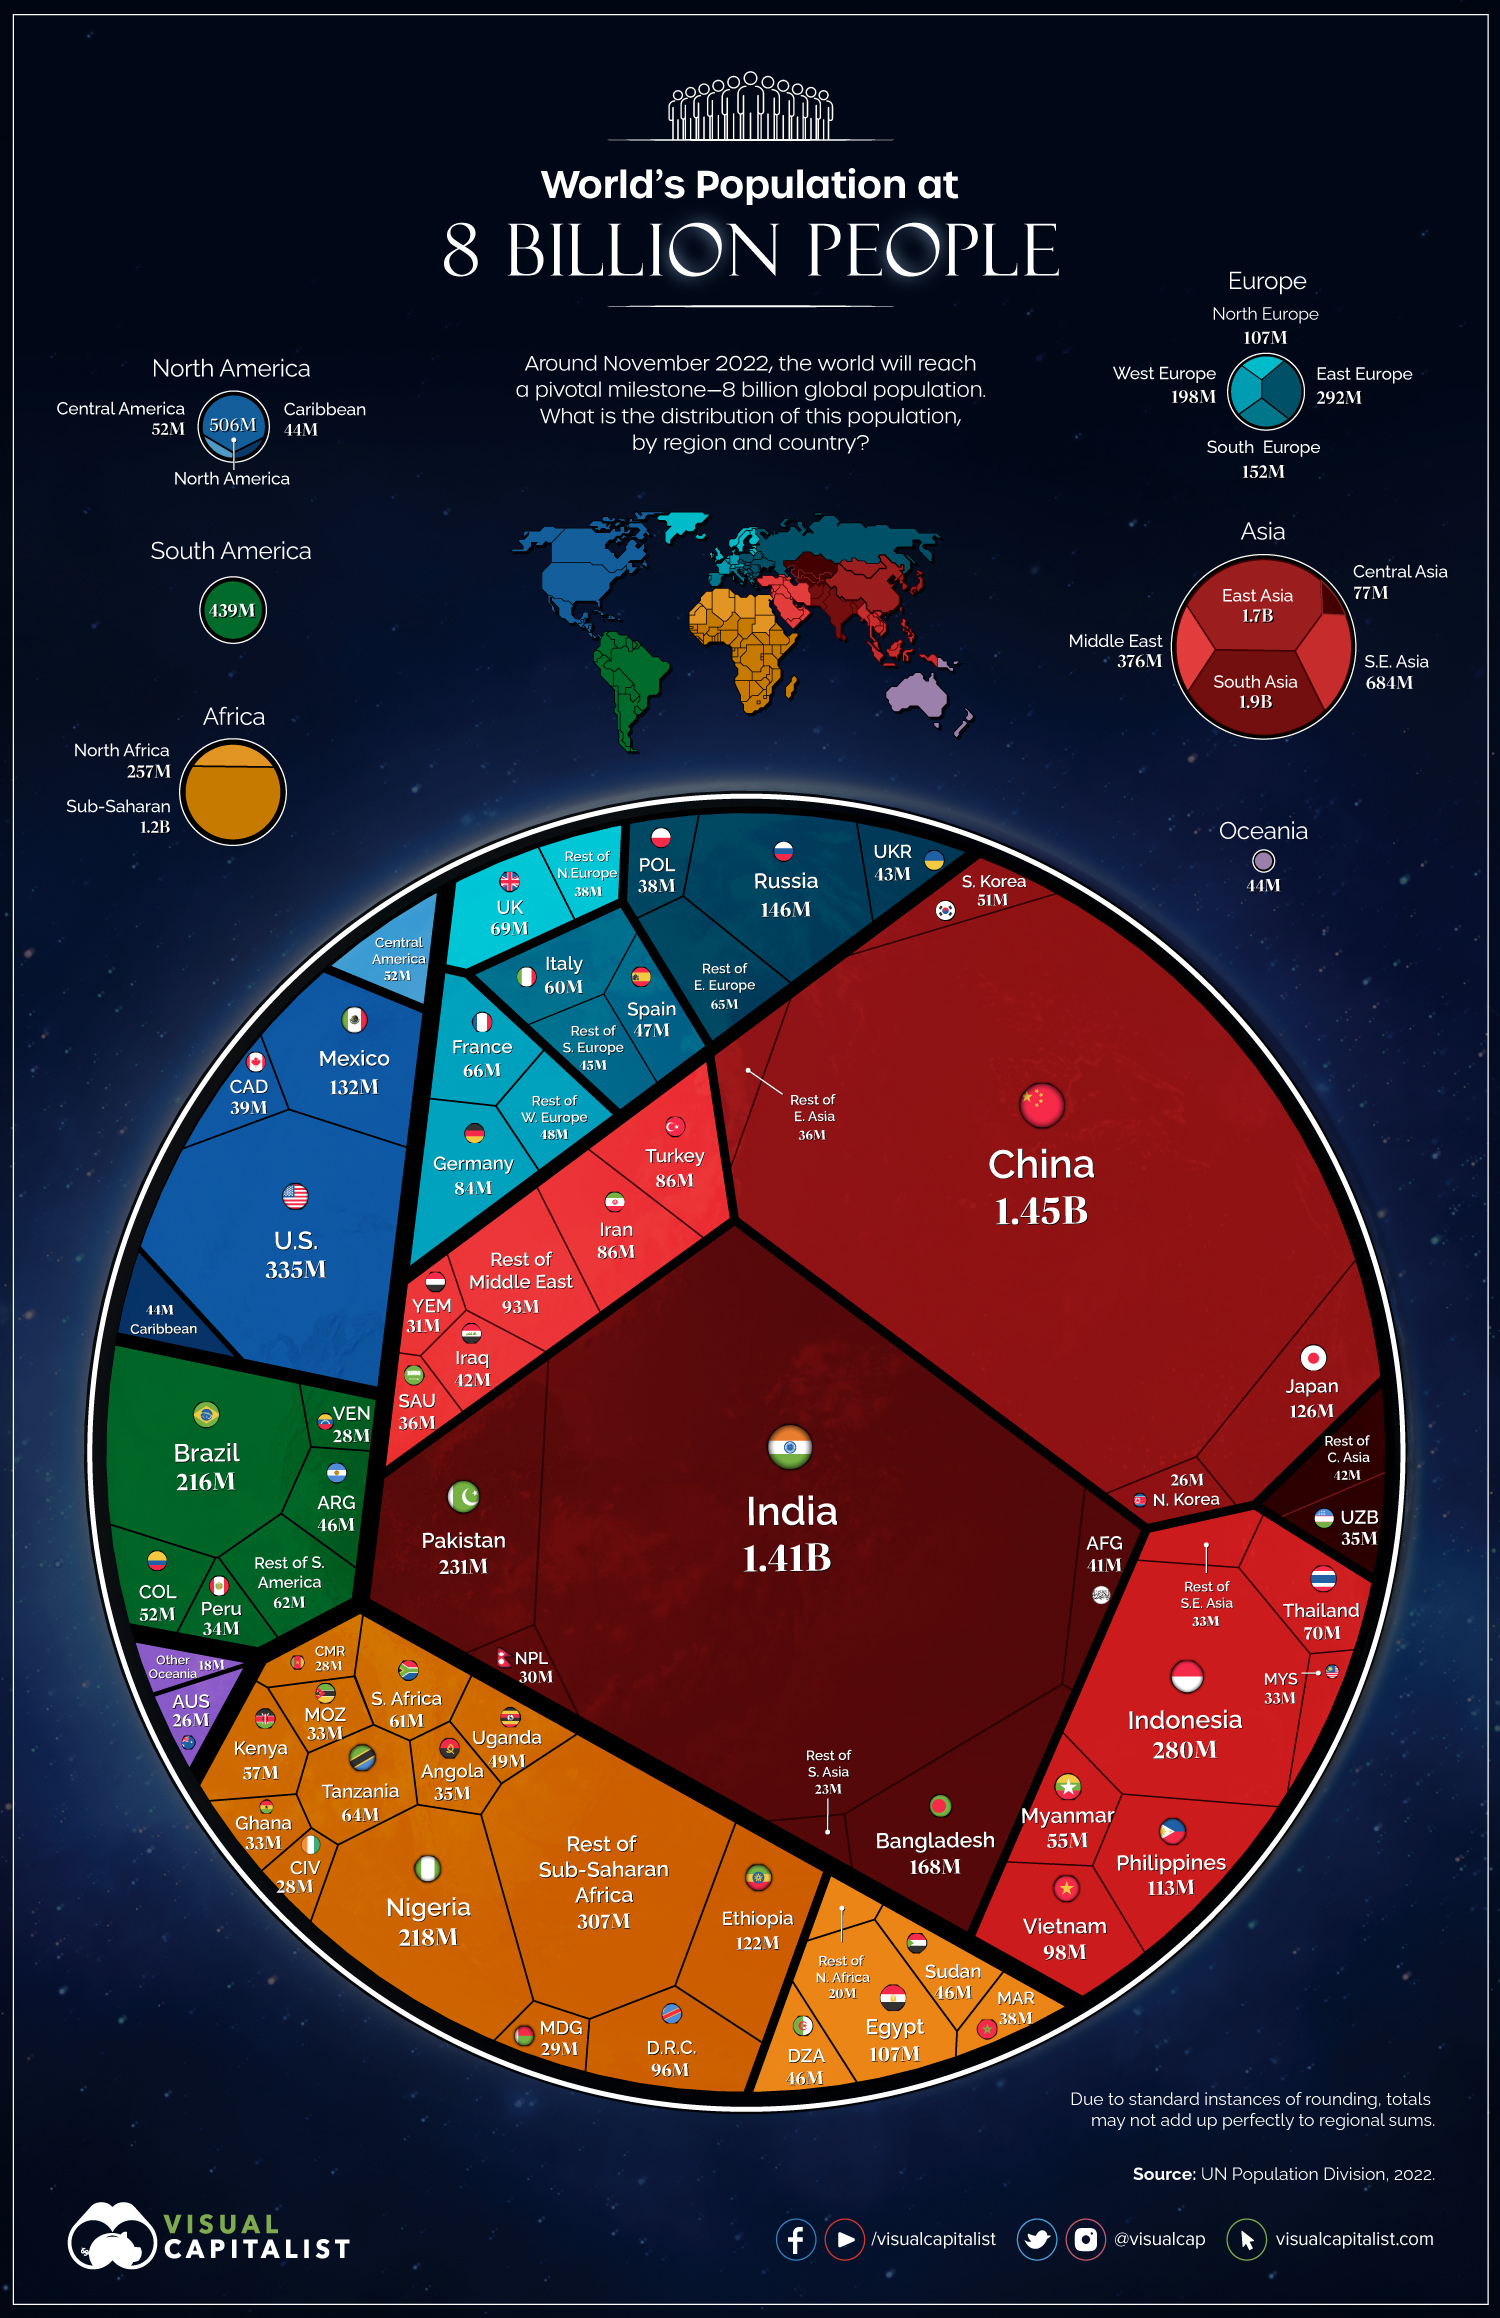 Data visualization showing a population breakdown of the world's countries in 2022